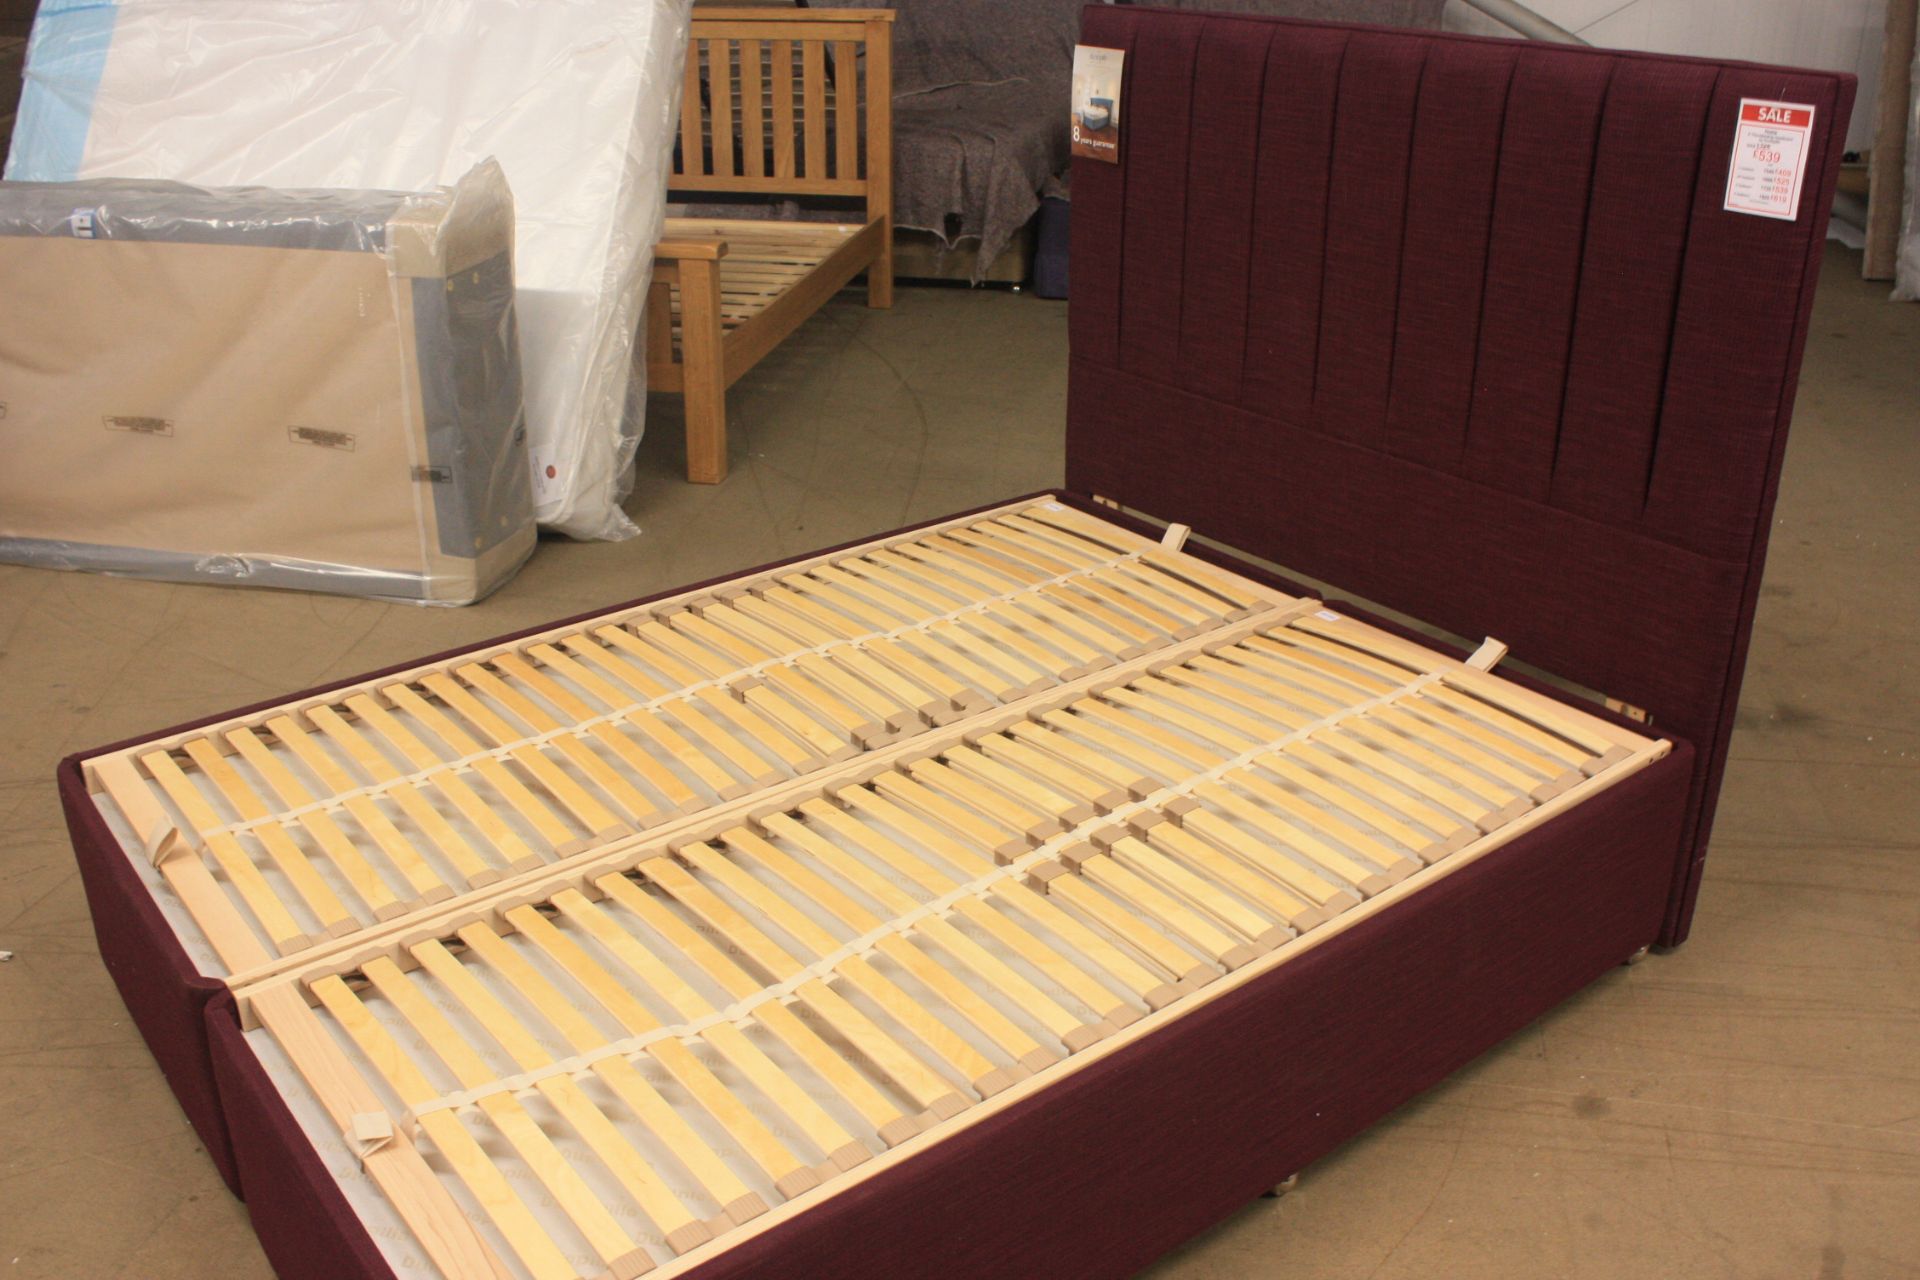 DUNLOPILLO SOVEREIGN KINGSIZE 150CM COMPLETE BED / MATTRESS AND HEADBOARD IN PLUM. RRP £2200